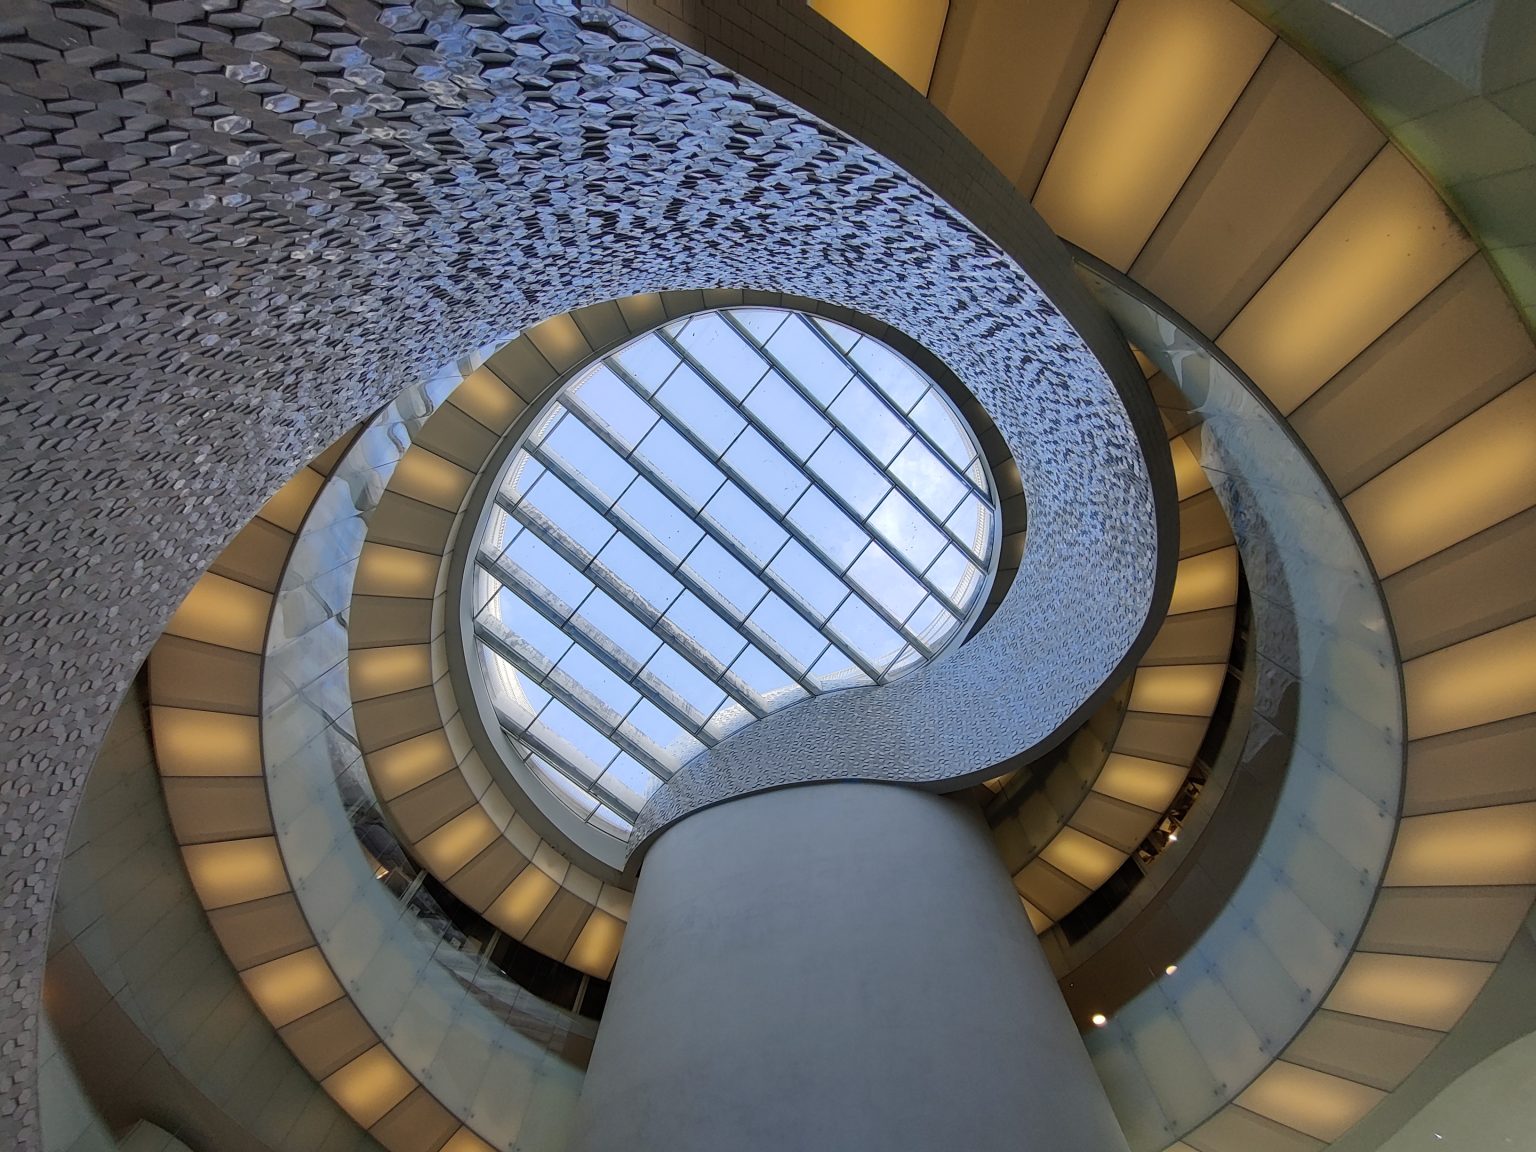 An interior architectural detail featuring a circular design. There's a textured, patterned ceiling leading to a round skylight. Adjacent to this is a spiral structure with illuminated segments. A pillar supports the structures. The overall color palette is white and beige.